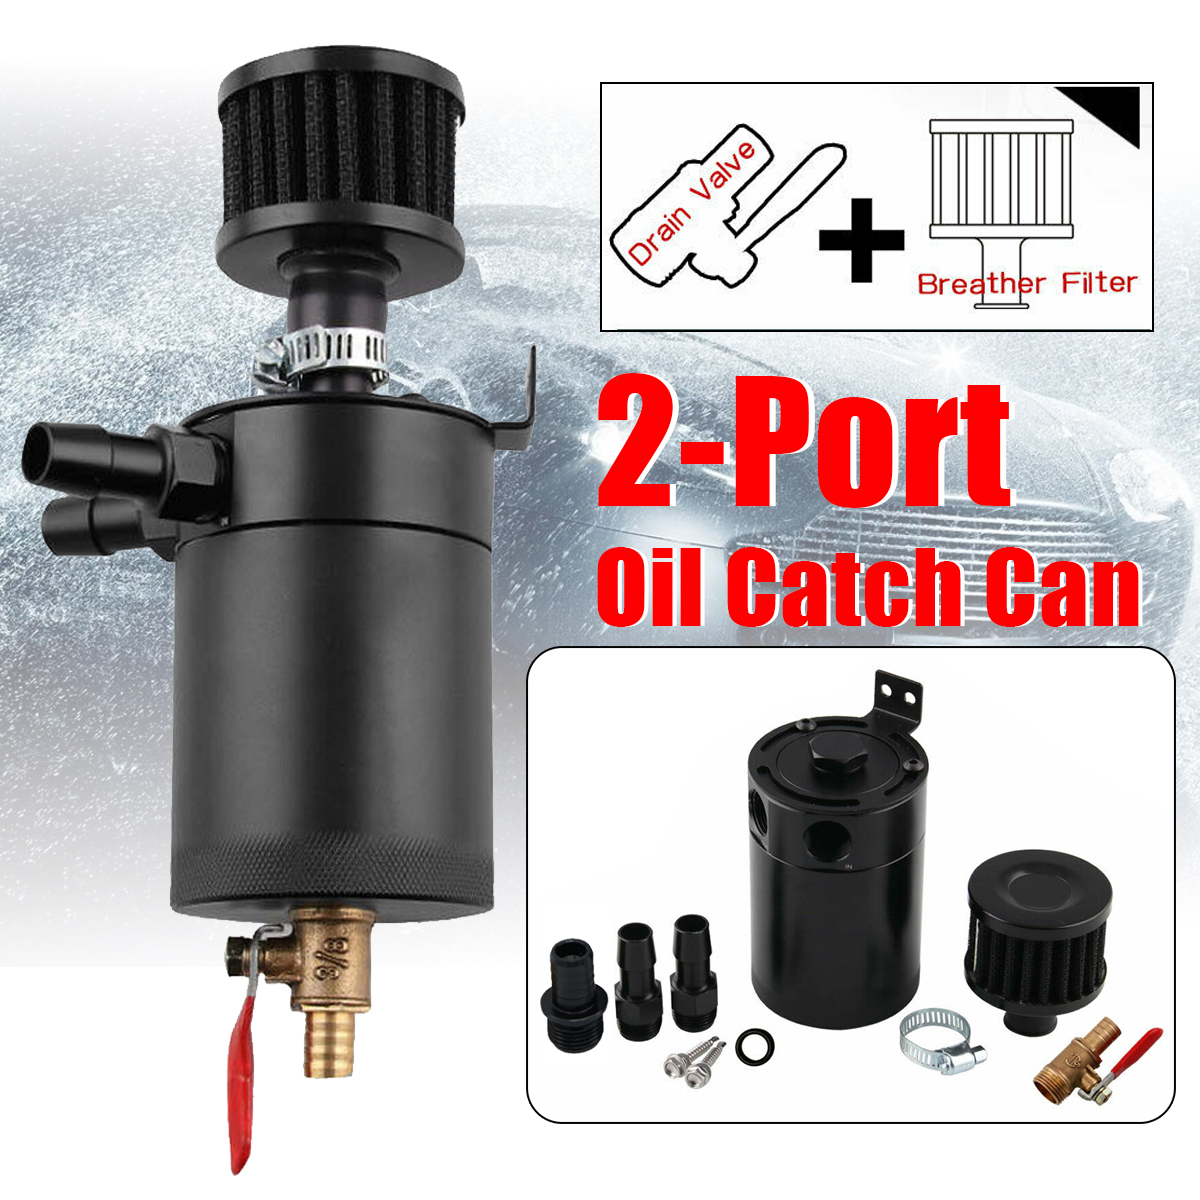 Aluminum Car Oil Catch Can Reservoir Tank W/ Breather Filter Baffled 2 Ports 